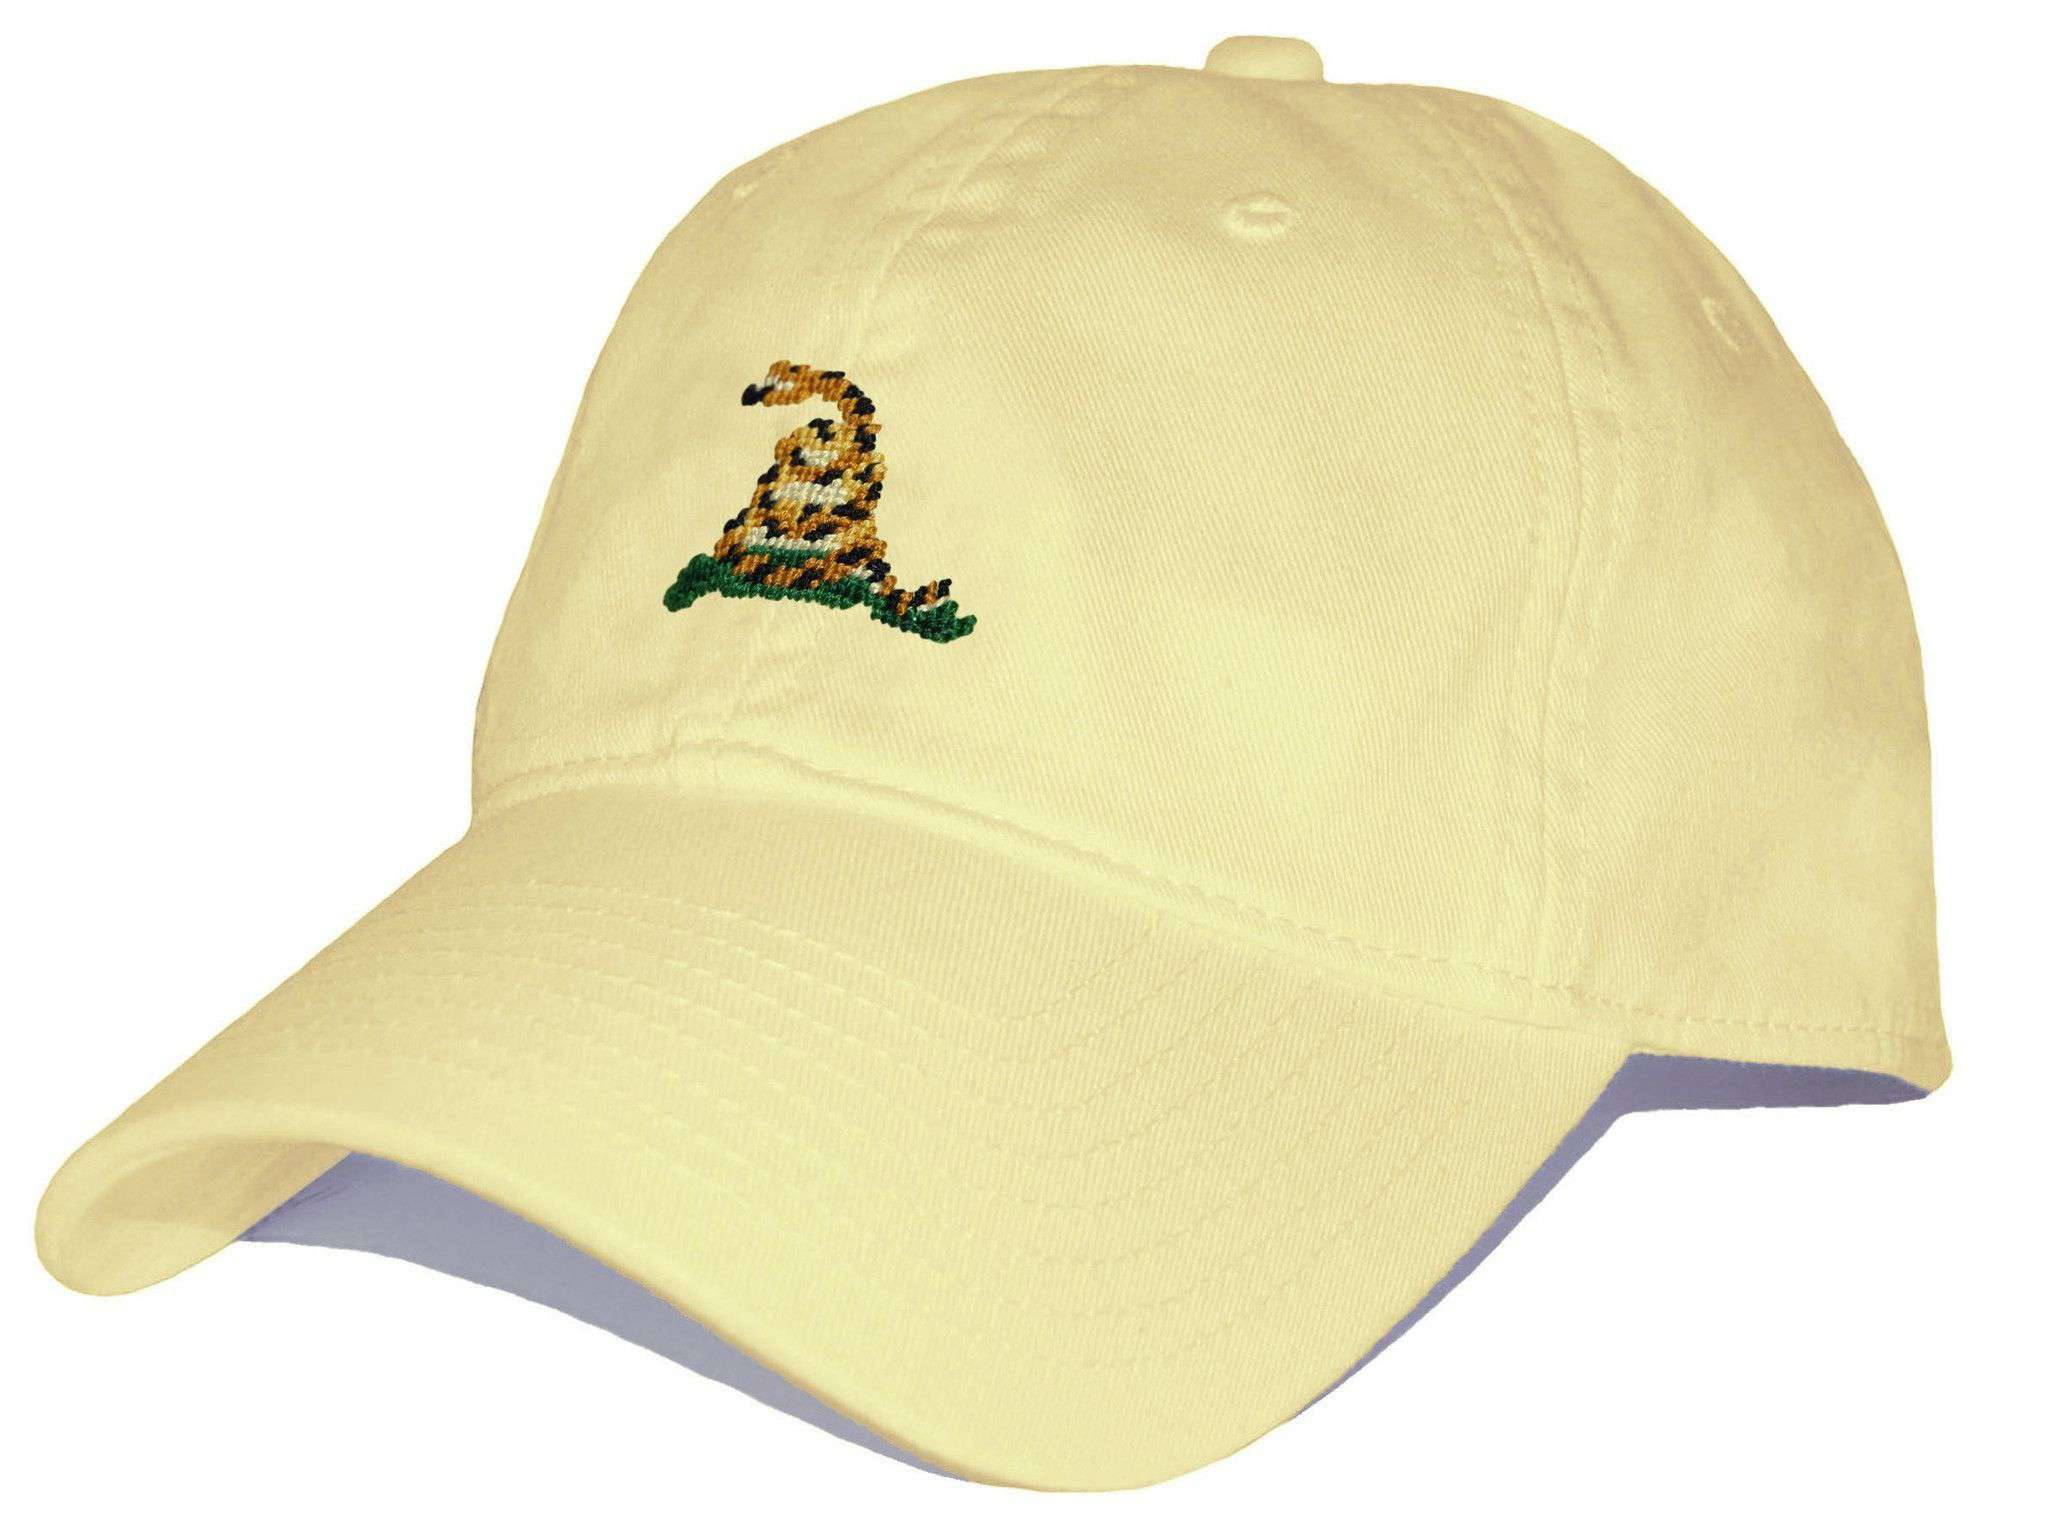 Gadsden Needlepoint Hat in Butter Yellow by Smathers & Branson - Country Club Prep